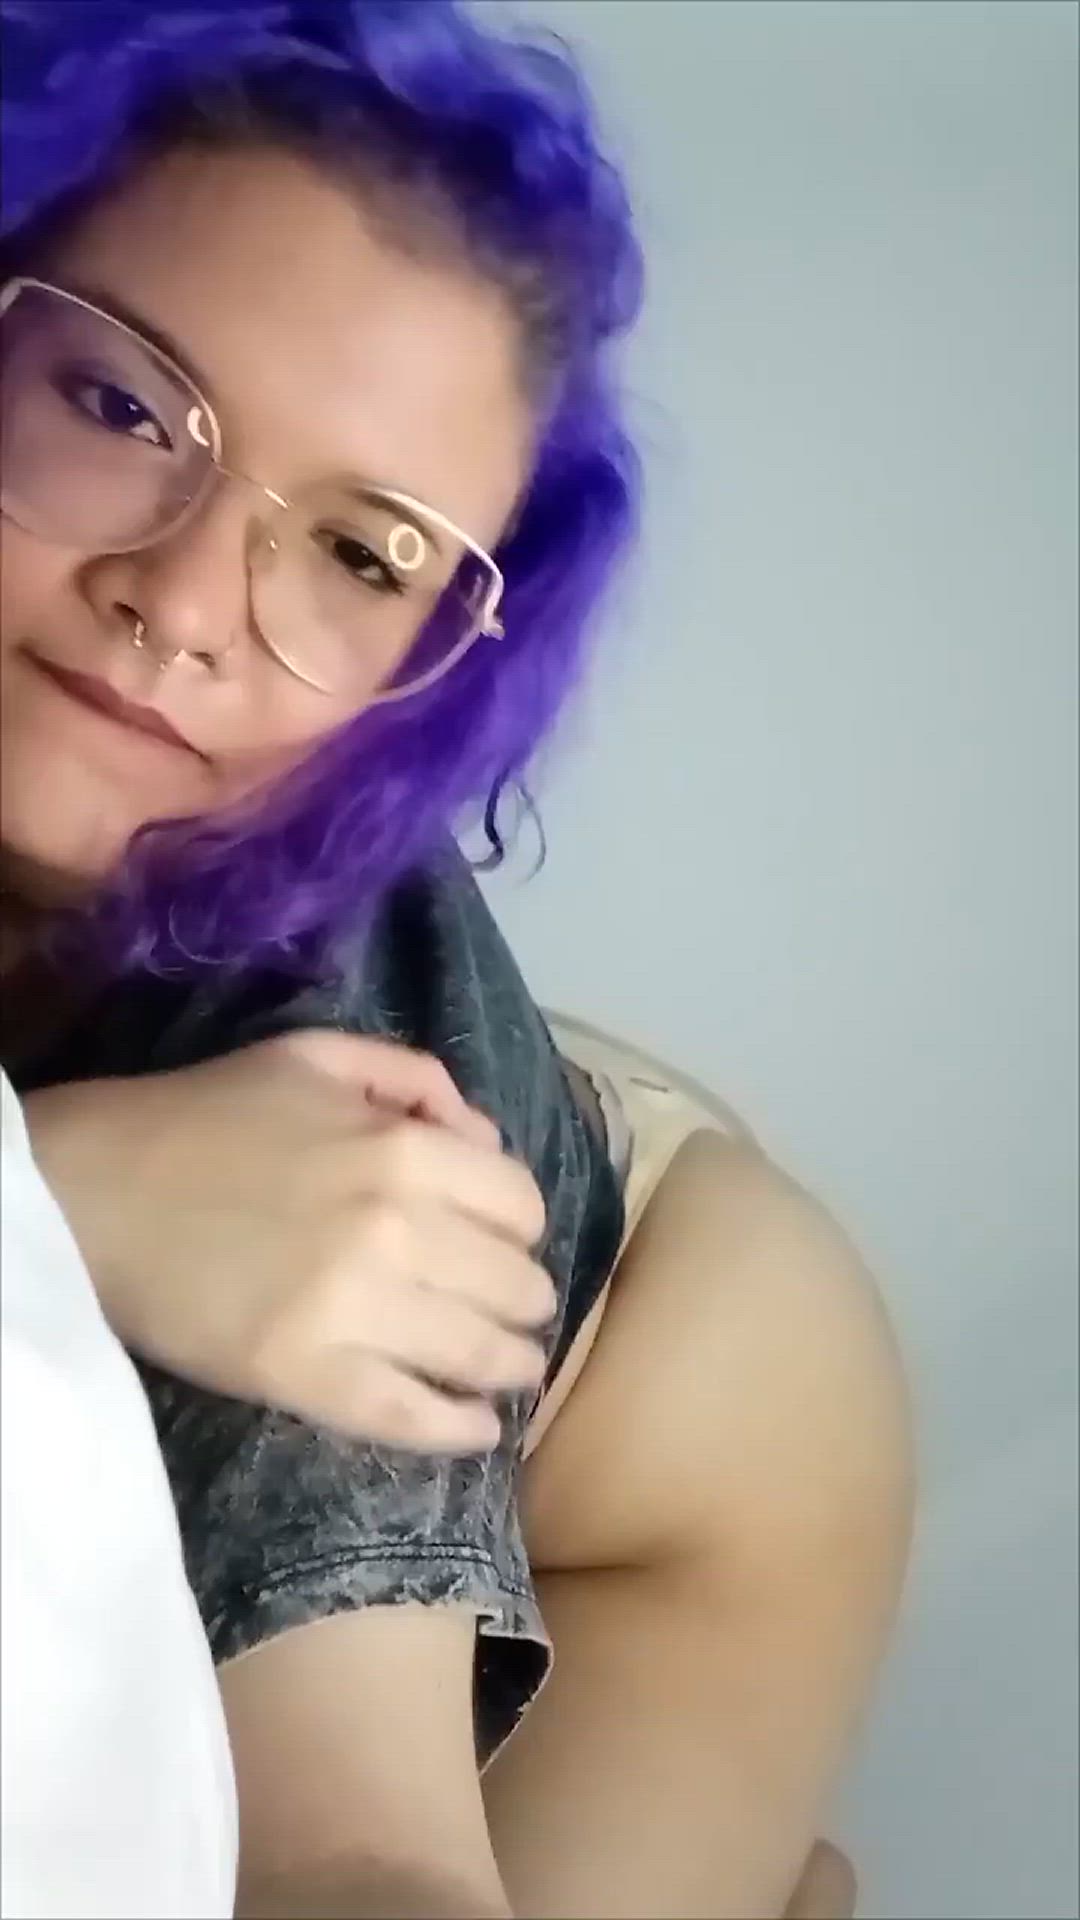 Ass porn video with onlyfans model Ivy Mayhem X <strong>@ivymayhemx</strong>